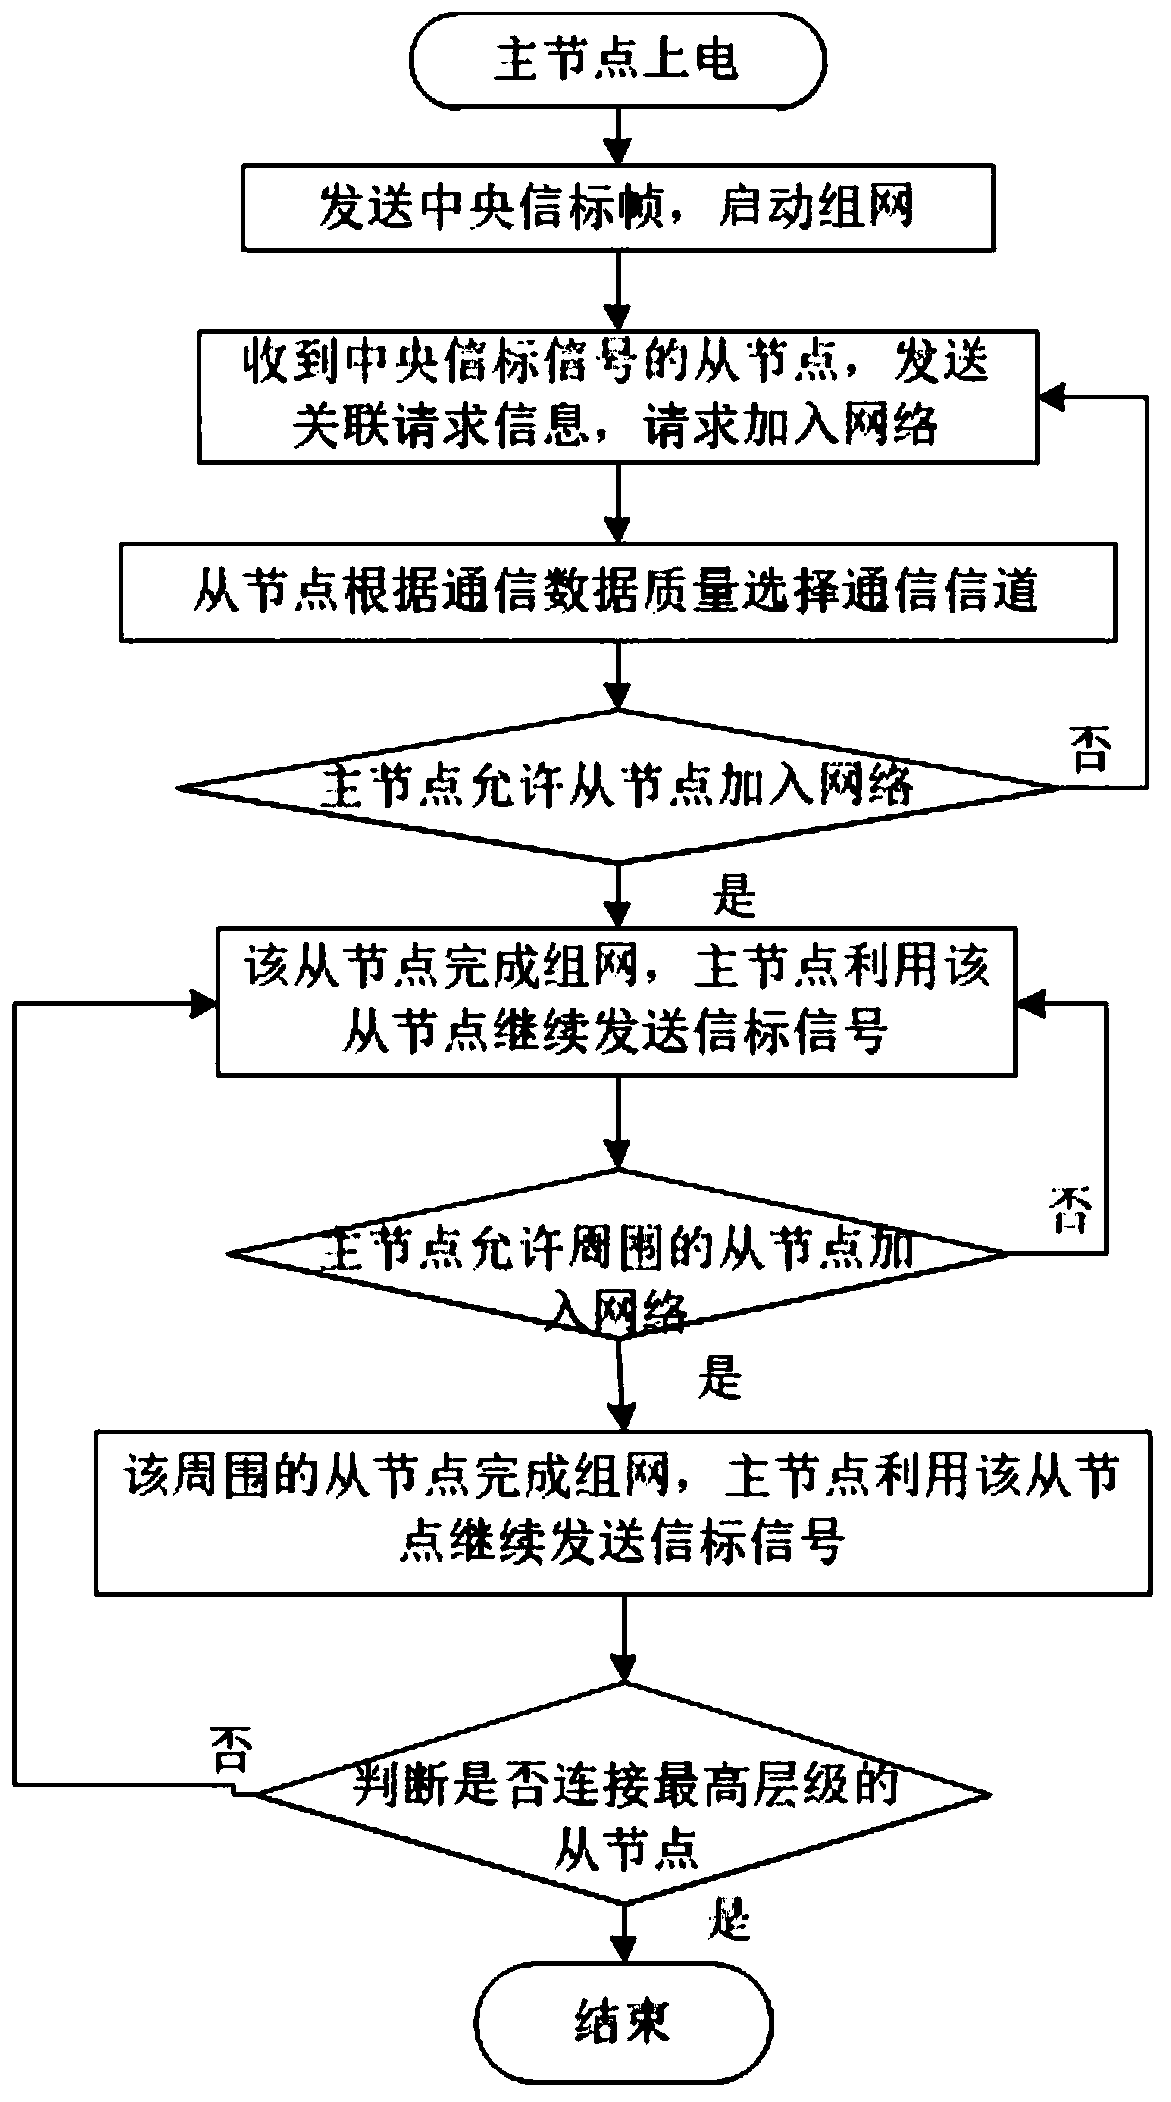 Hybrid dual-module network method based on wired and wireless